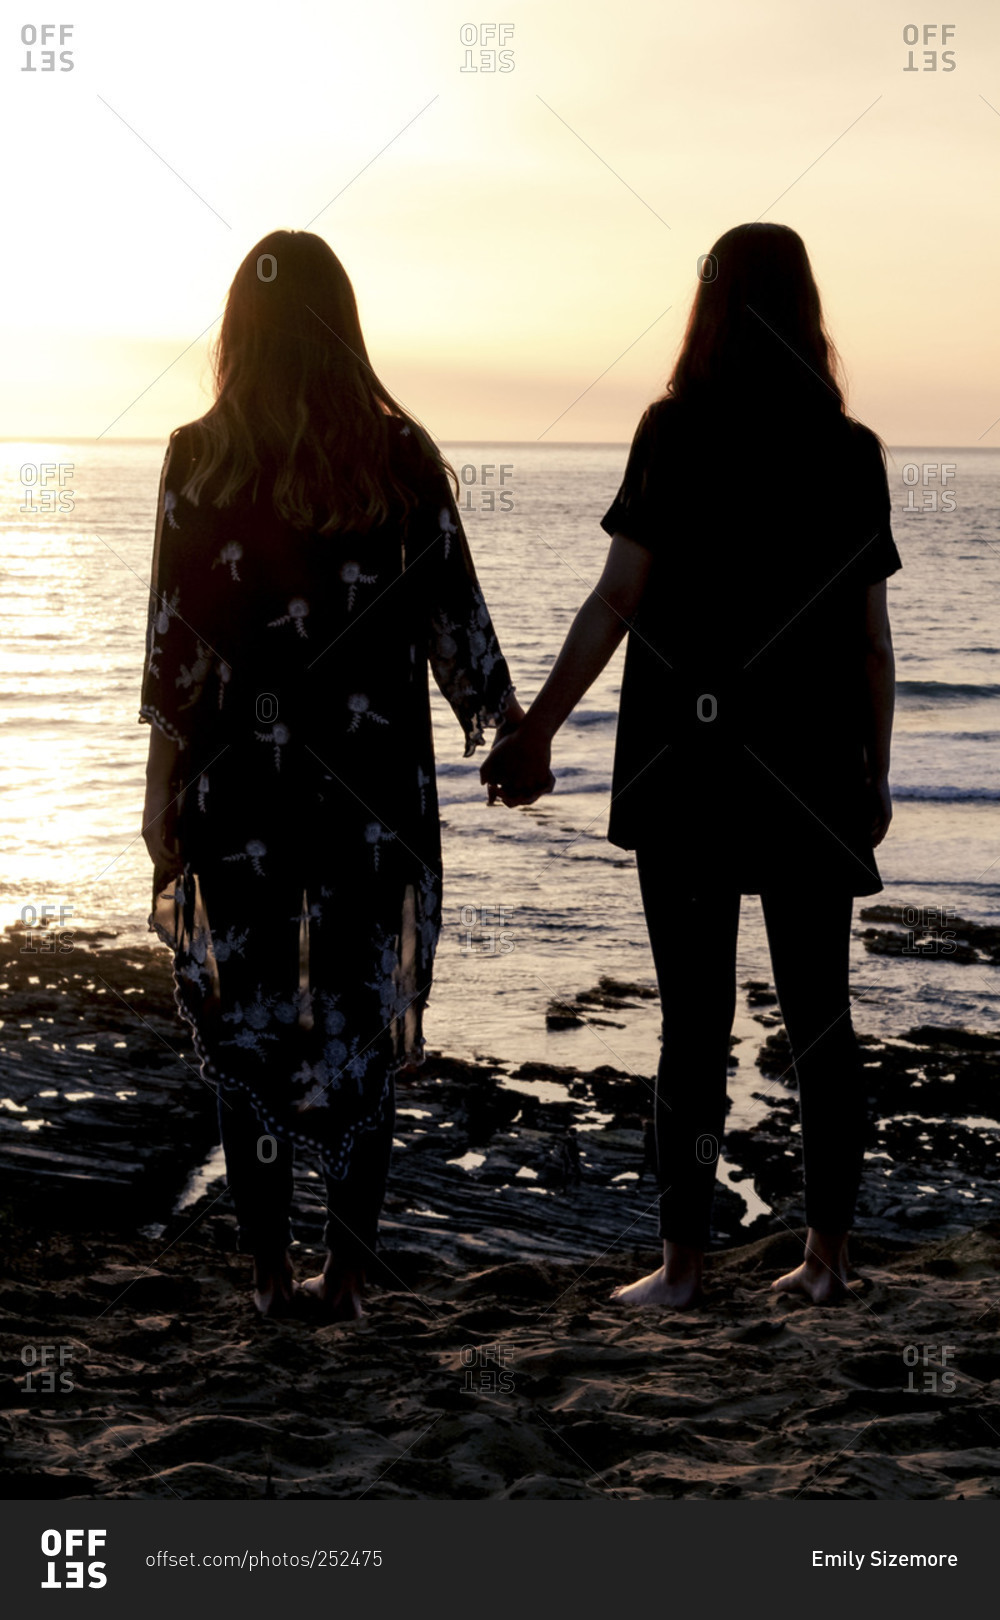 two girls holding hands silhouette